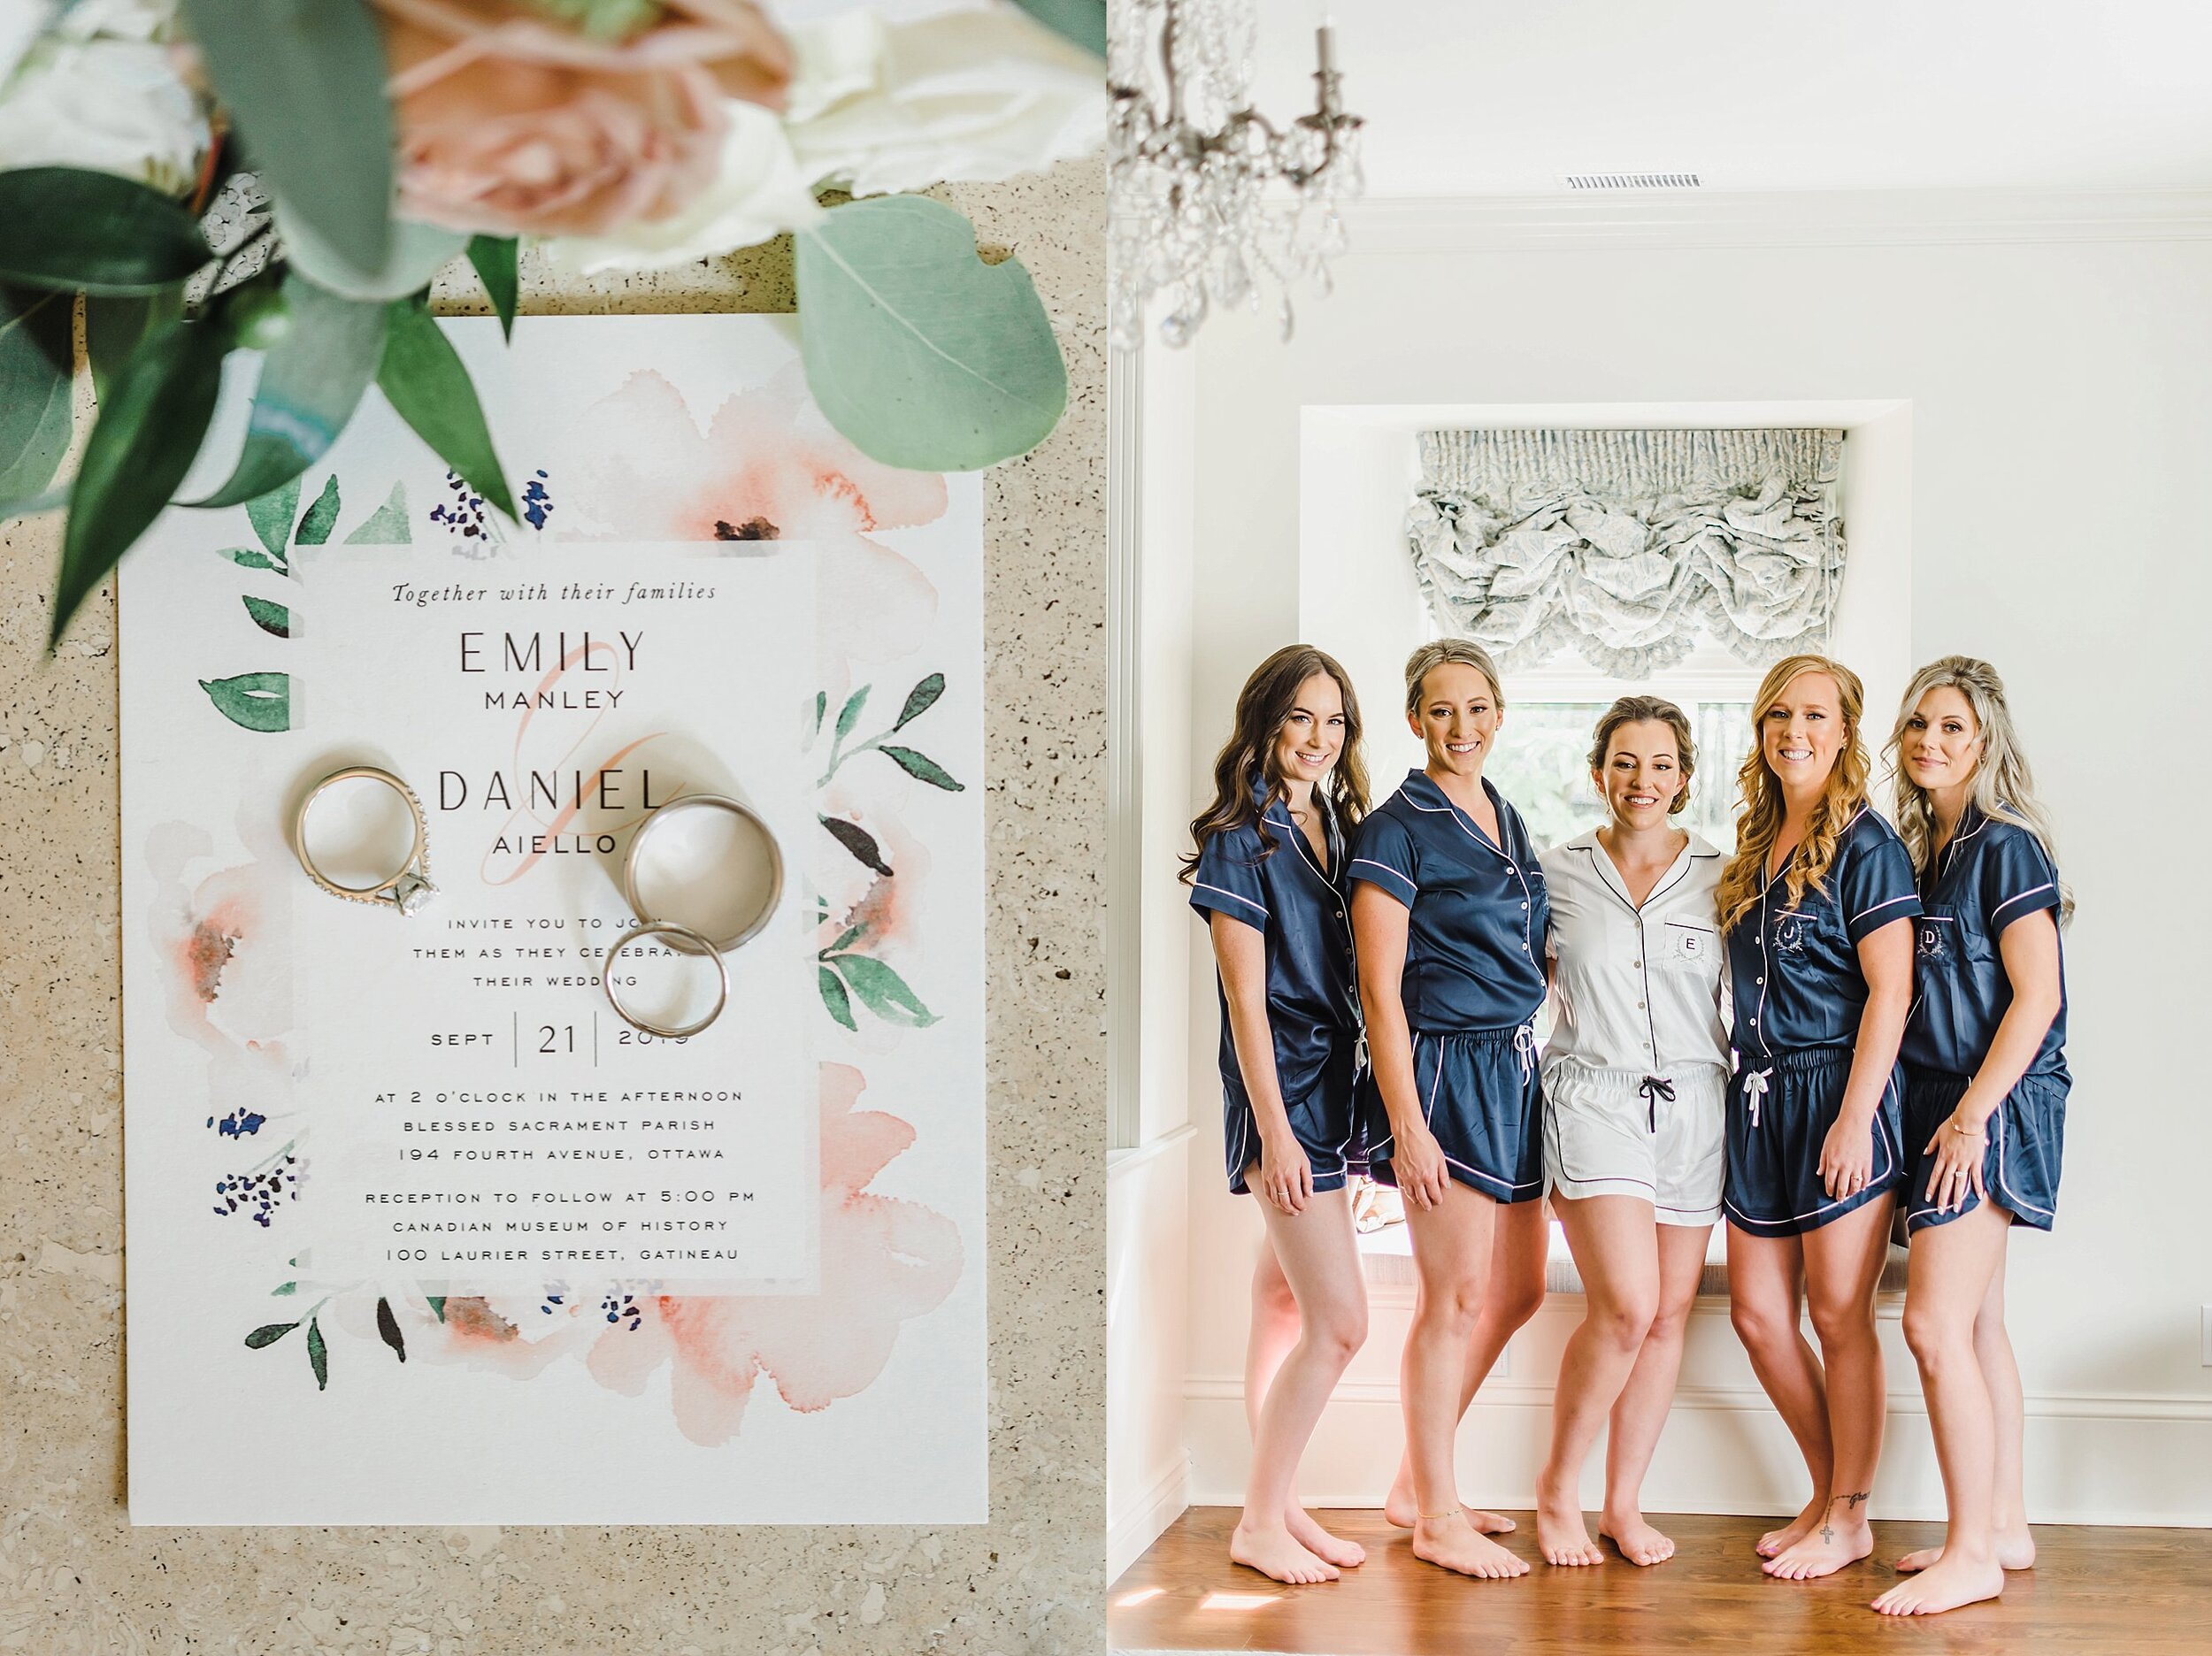  We had plenty of time to photograph Emily with her bridal party! 